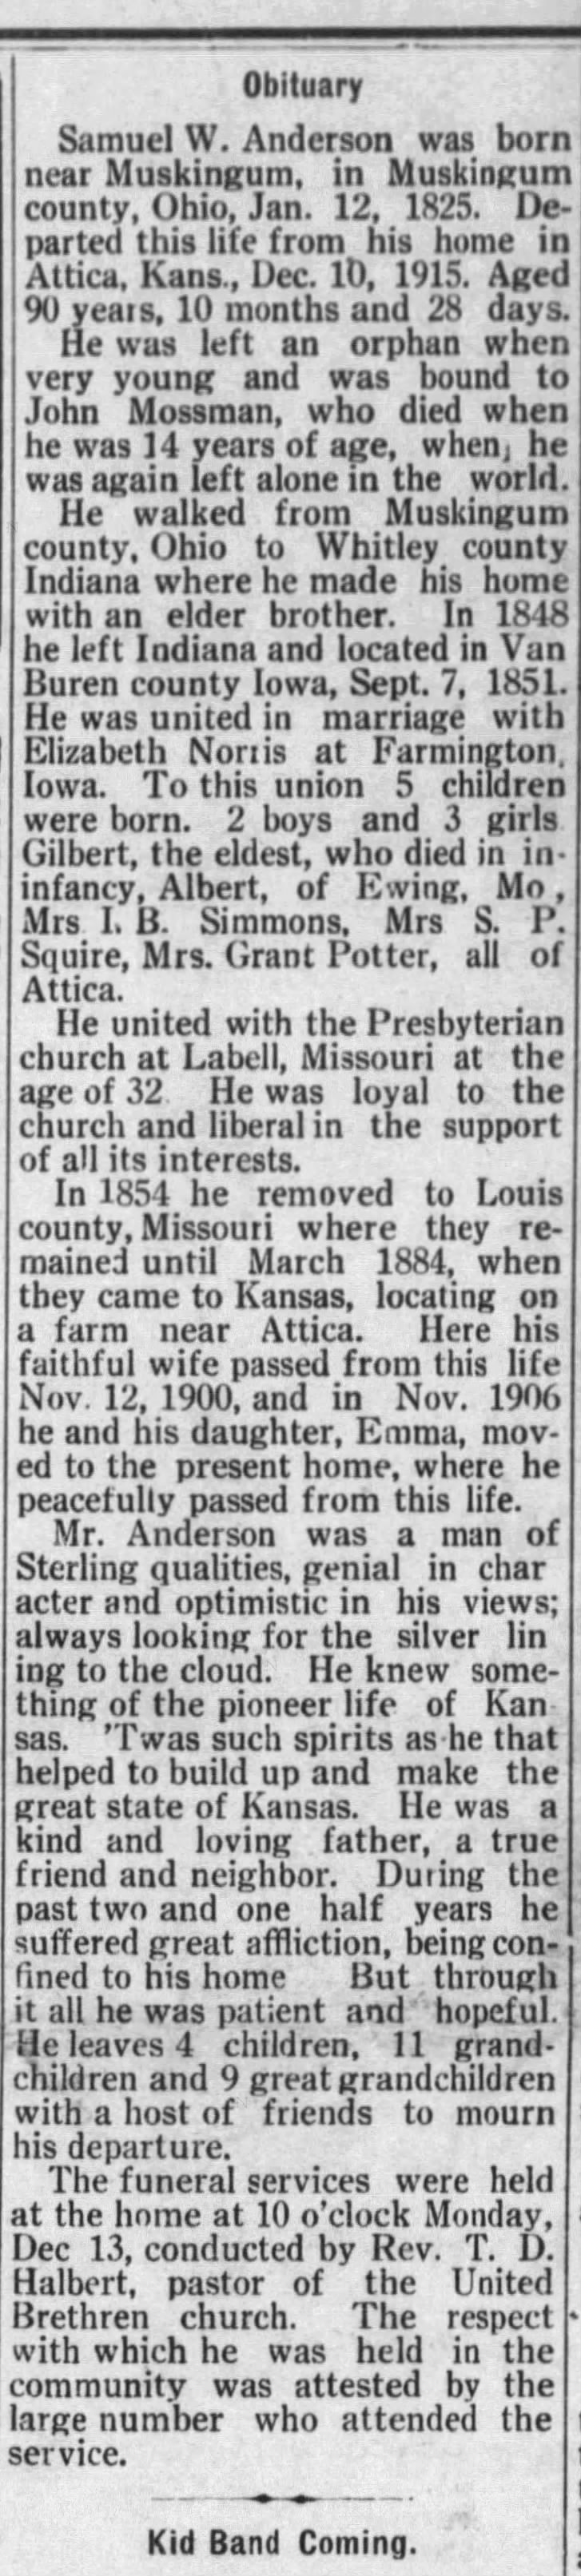 Obituary for Samuel W. Anderson